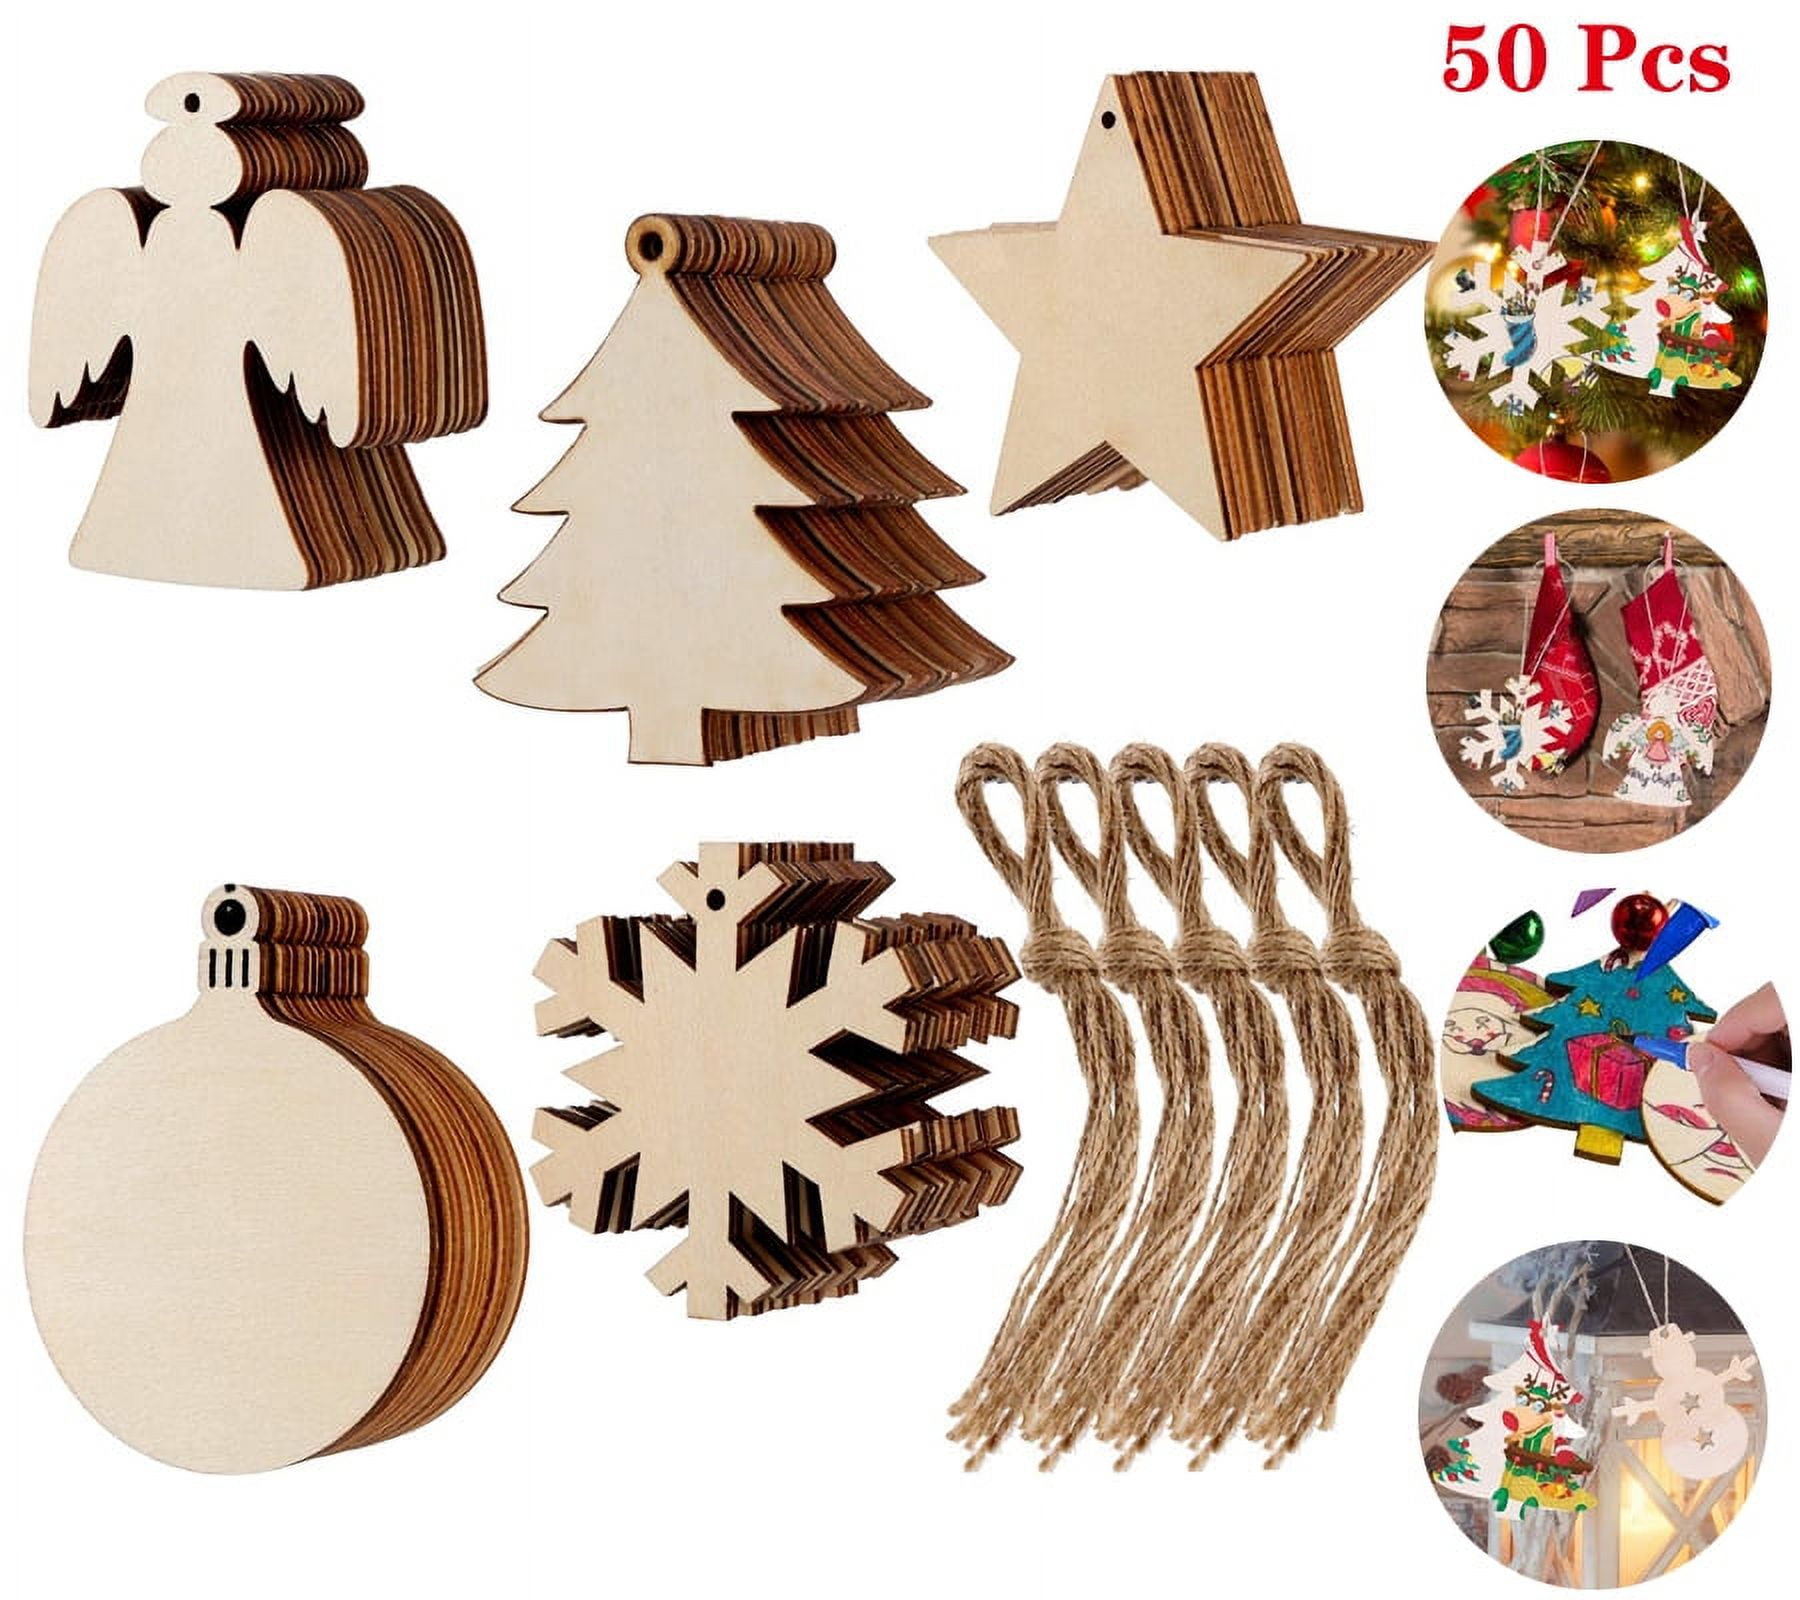 Make Your Own Christmas Wood Ornaments Craft Kit